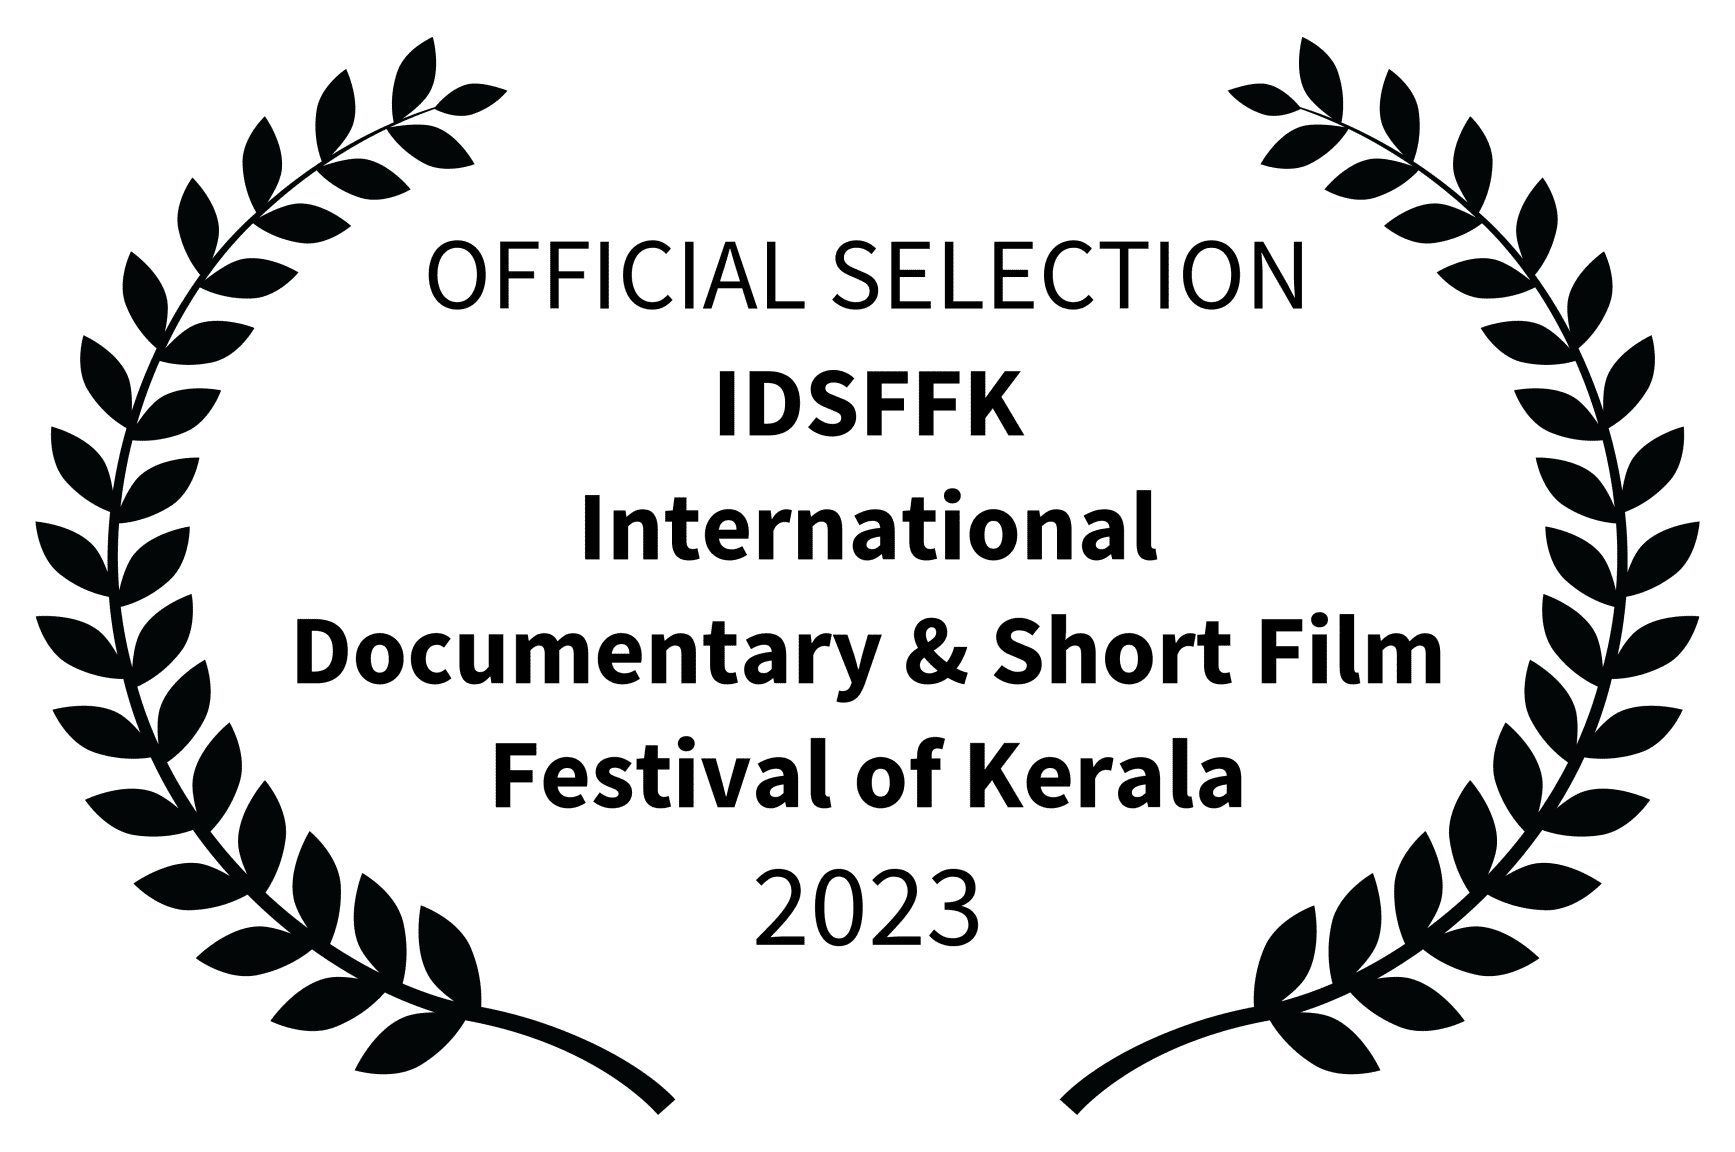 OFFICIAL SELECTION -IDSFFK